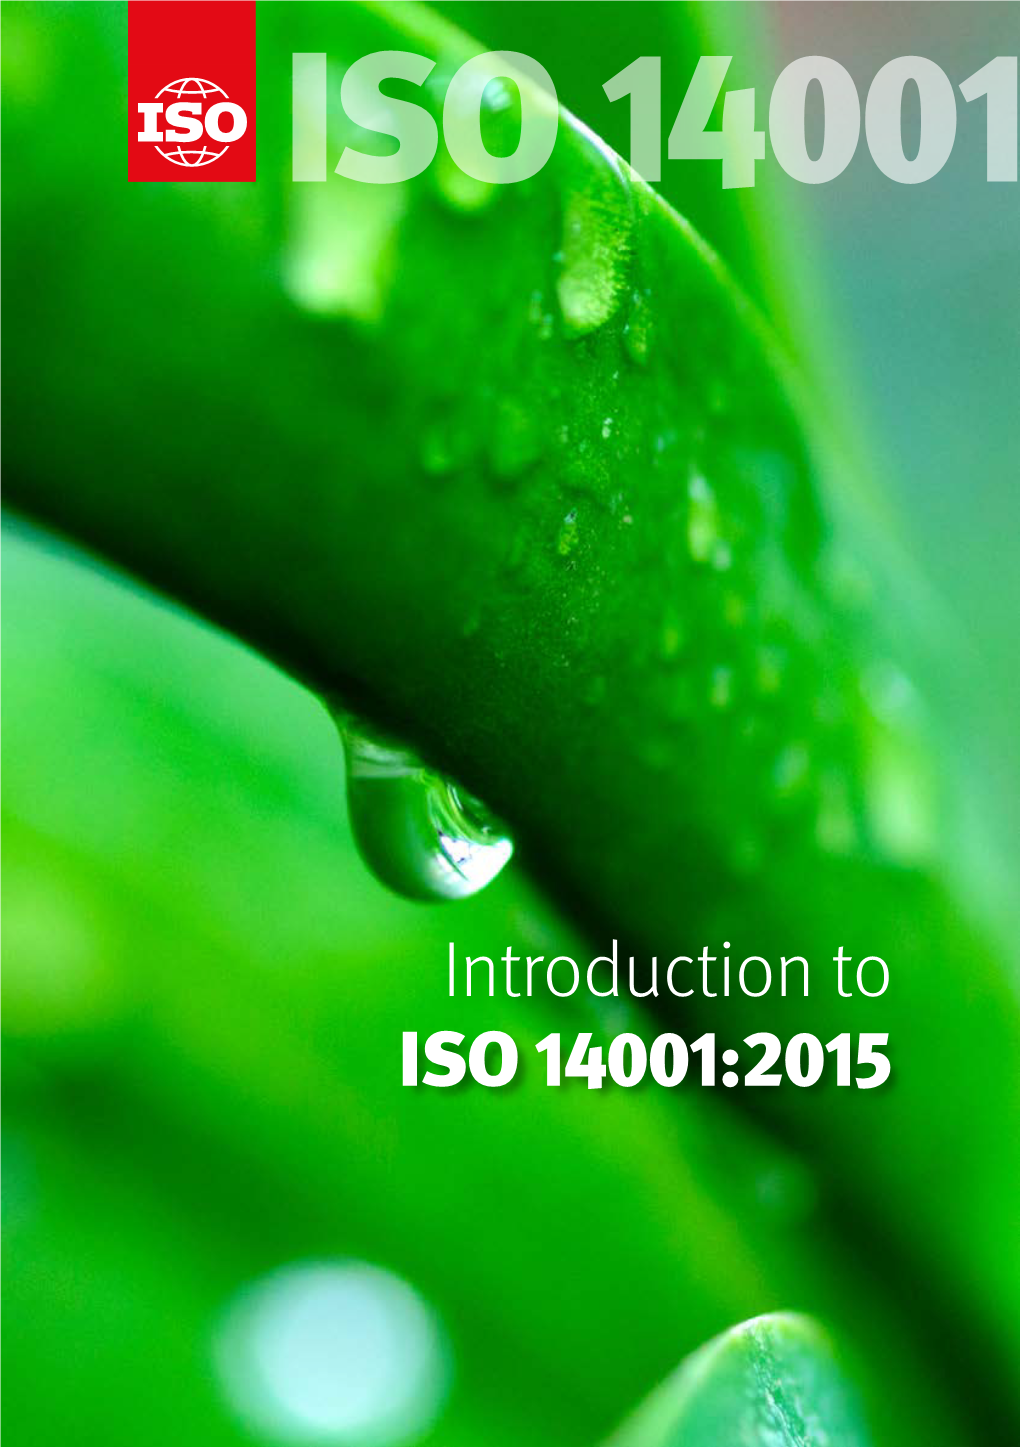 Introduction to ISO 14001:2015 ISO 14001 Is an Internationally Agreed Standard That Sets out the Requirements for an Environmental Management System